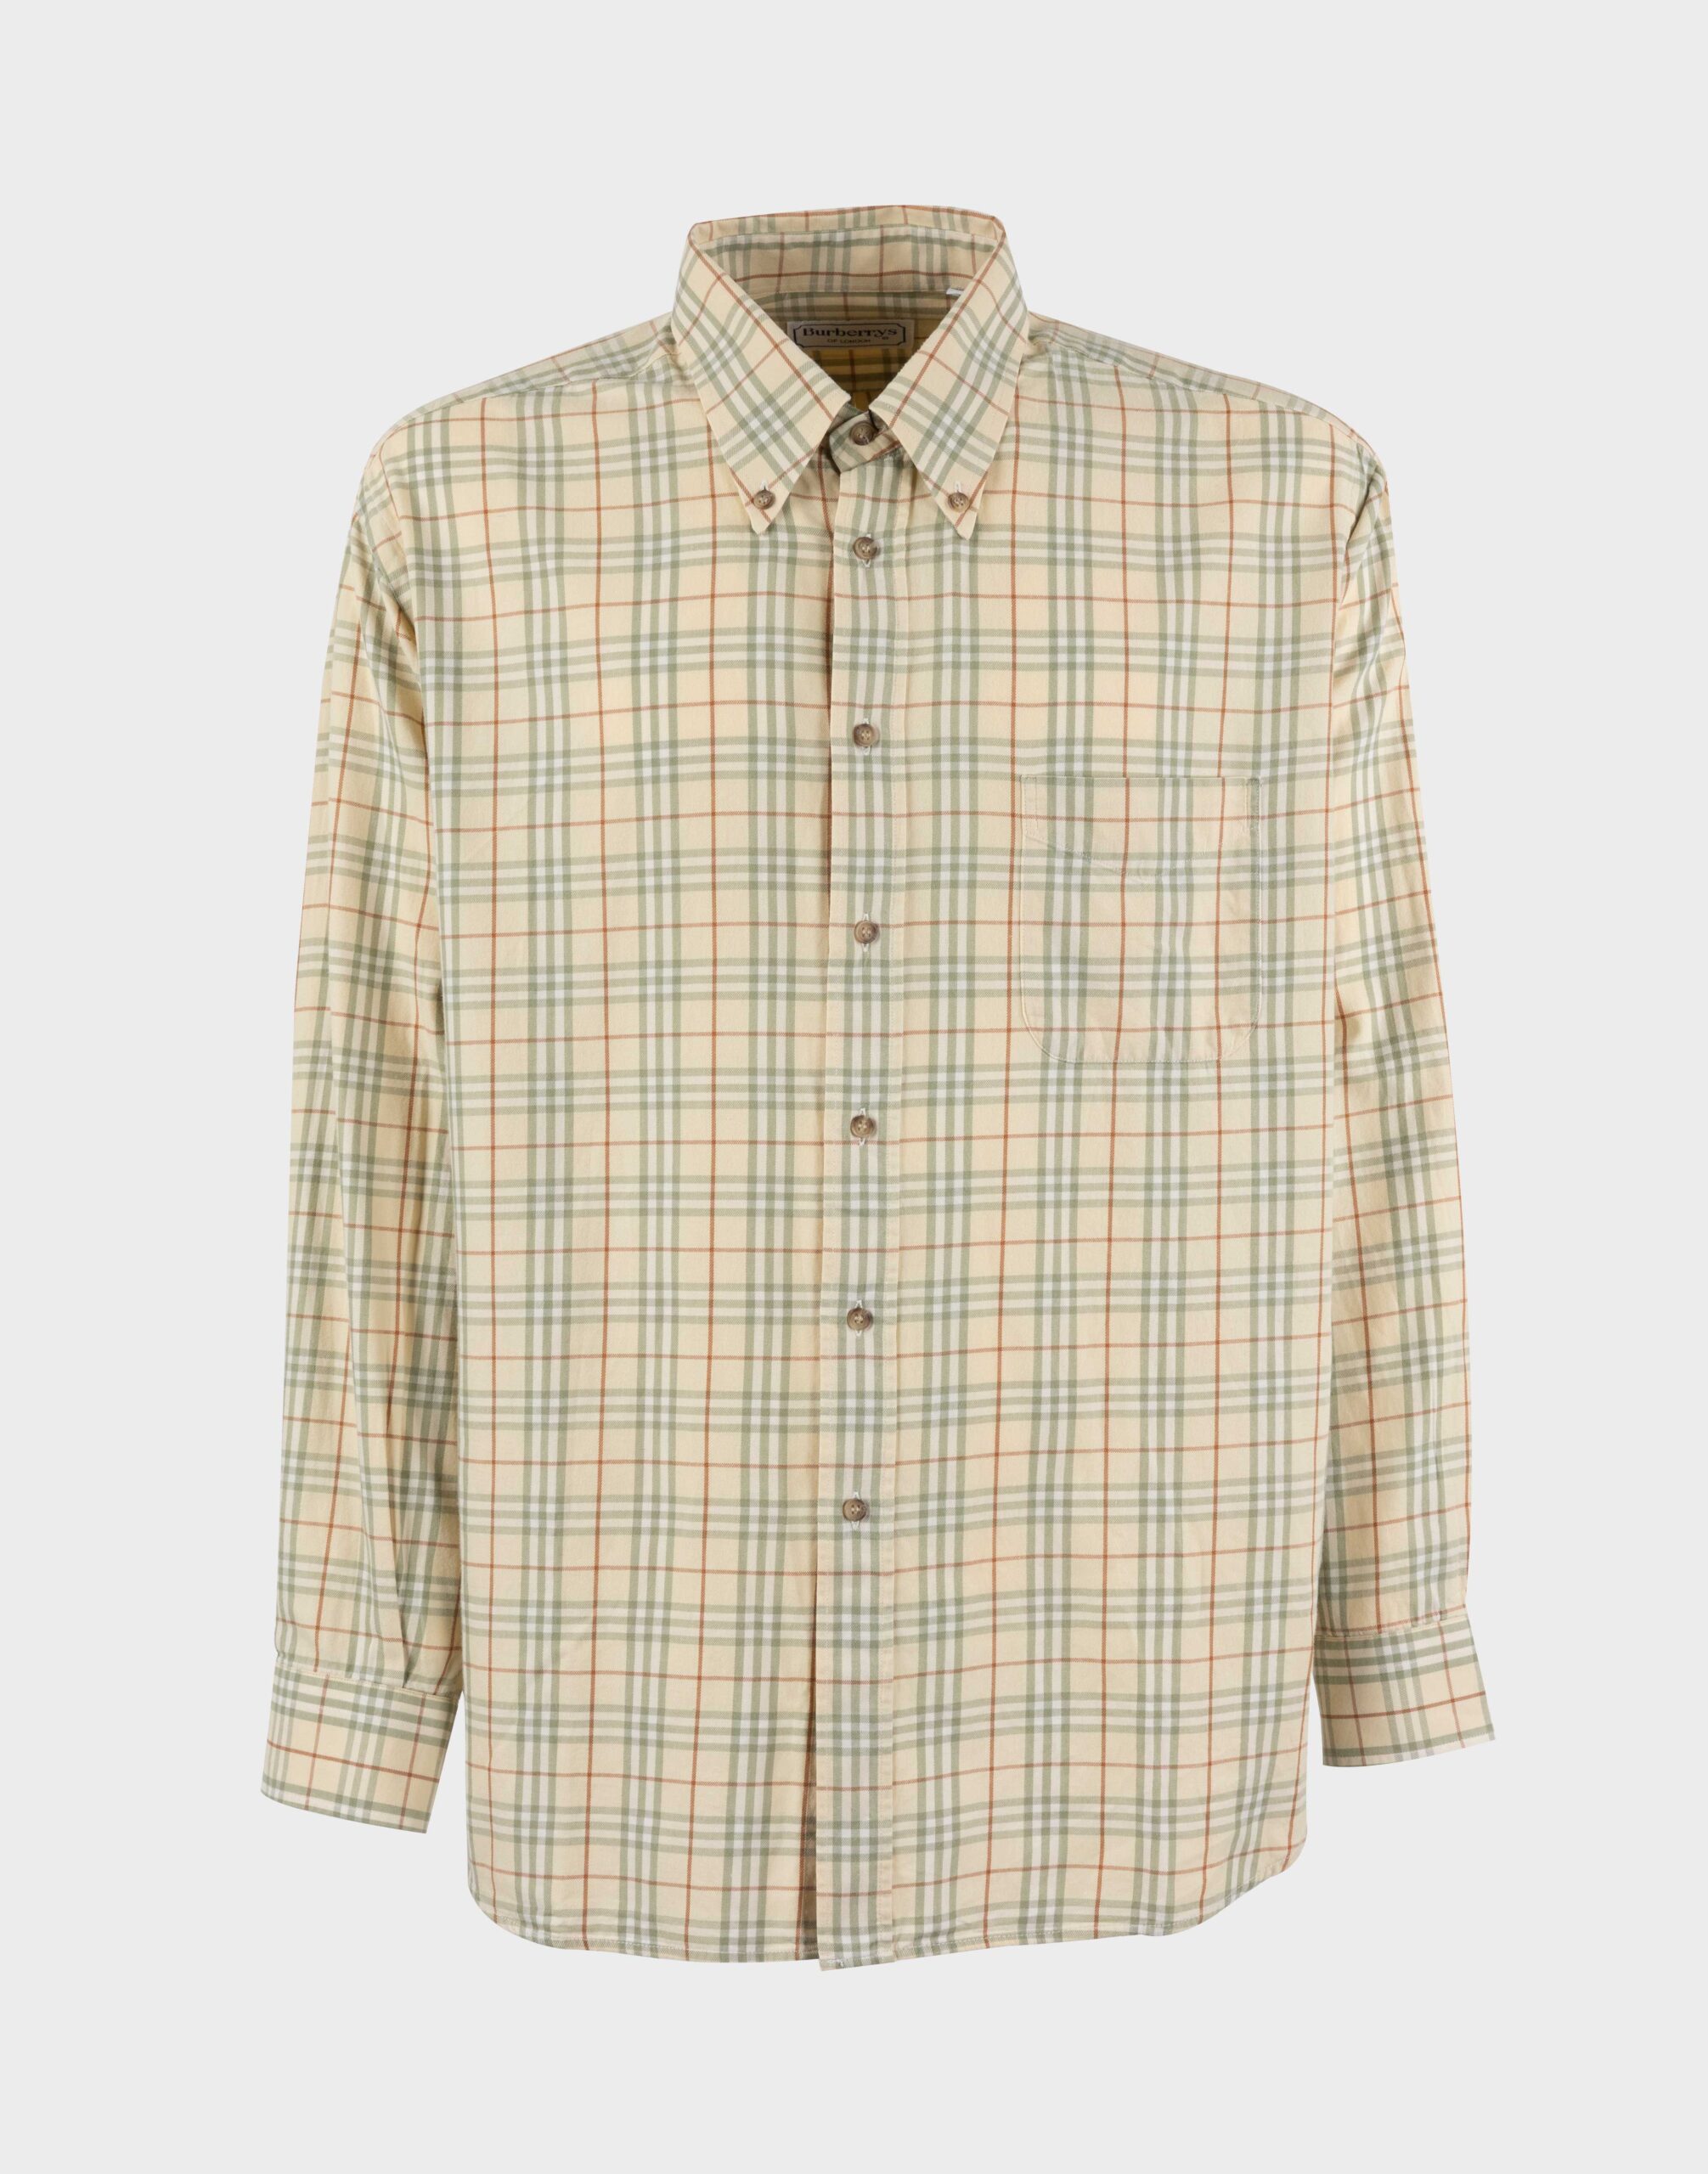 men's long-sleeved cotton shirt in pastel yellow with checked pattern